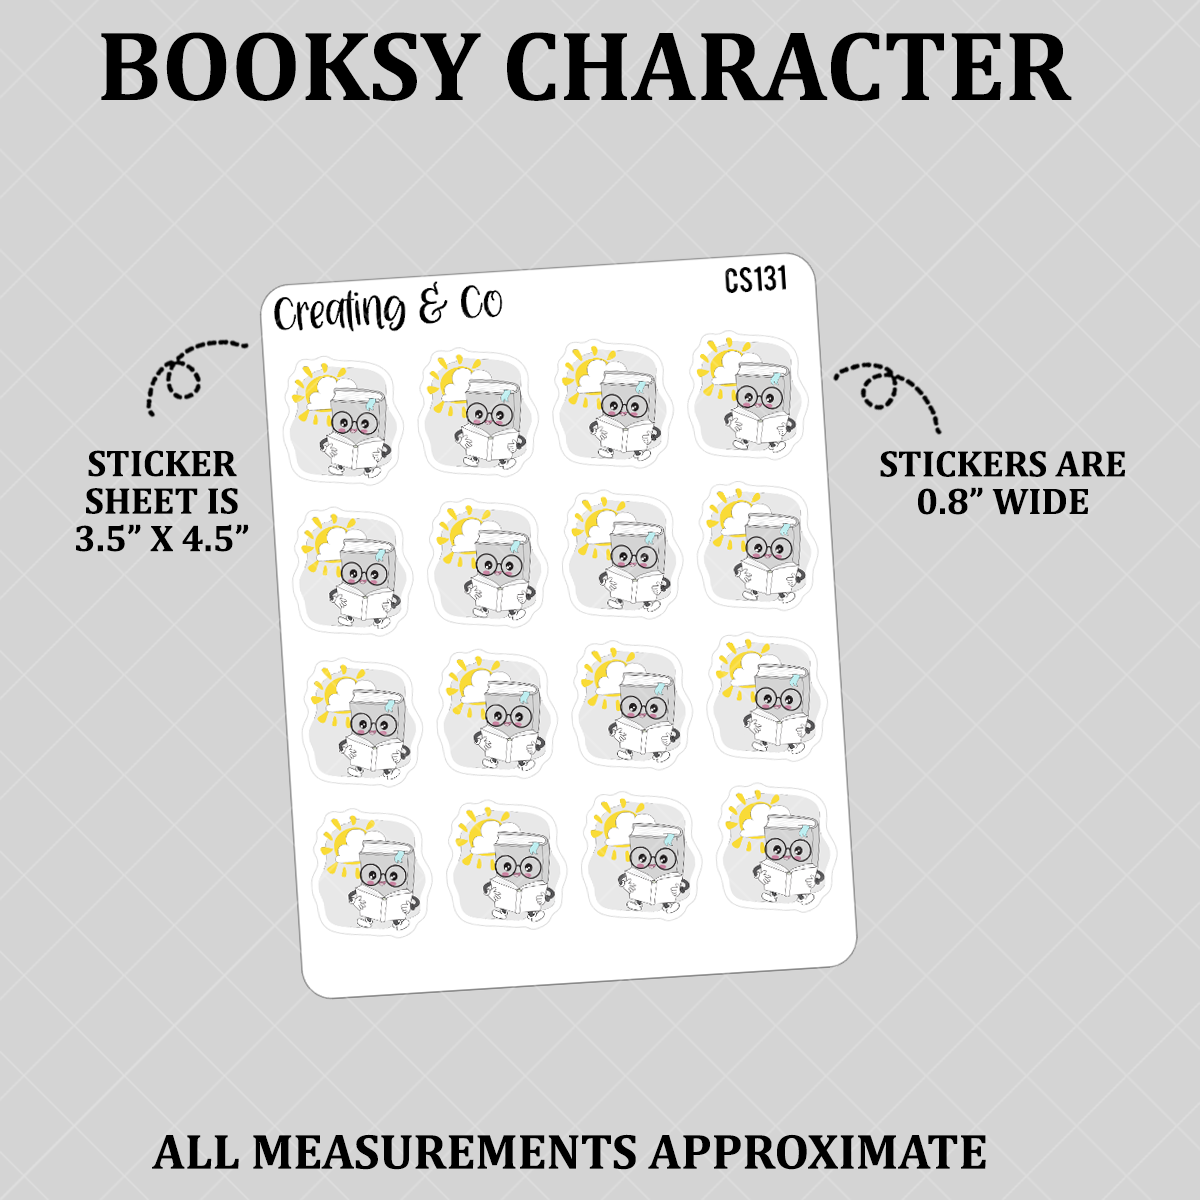 Cloudy Day Booksy Character Functional Stickers - CS131